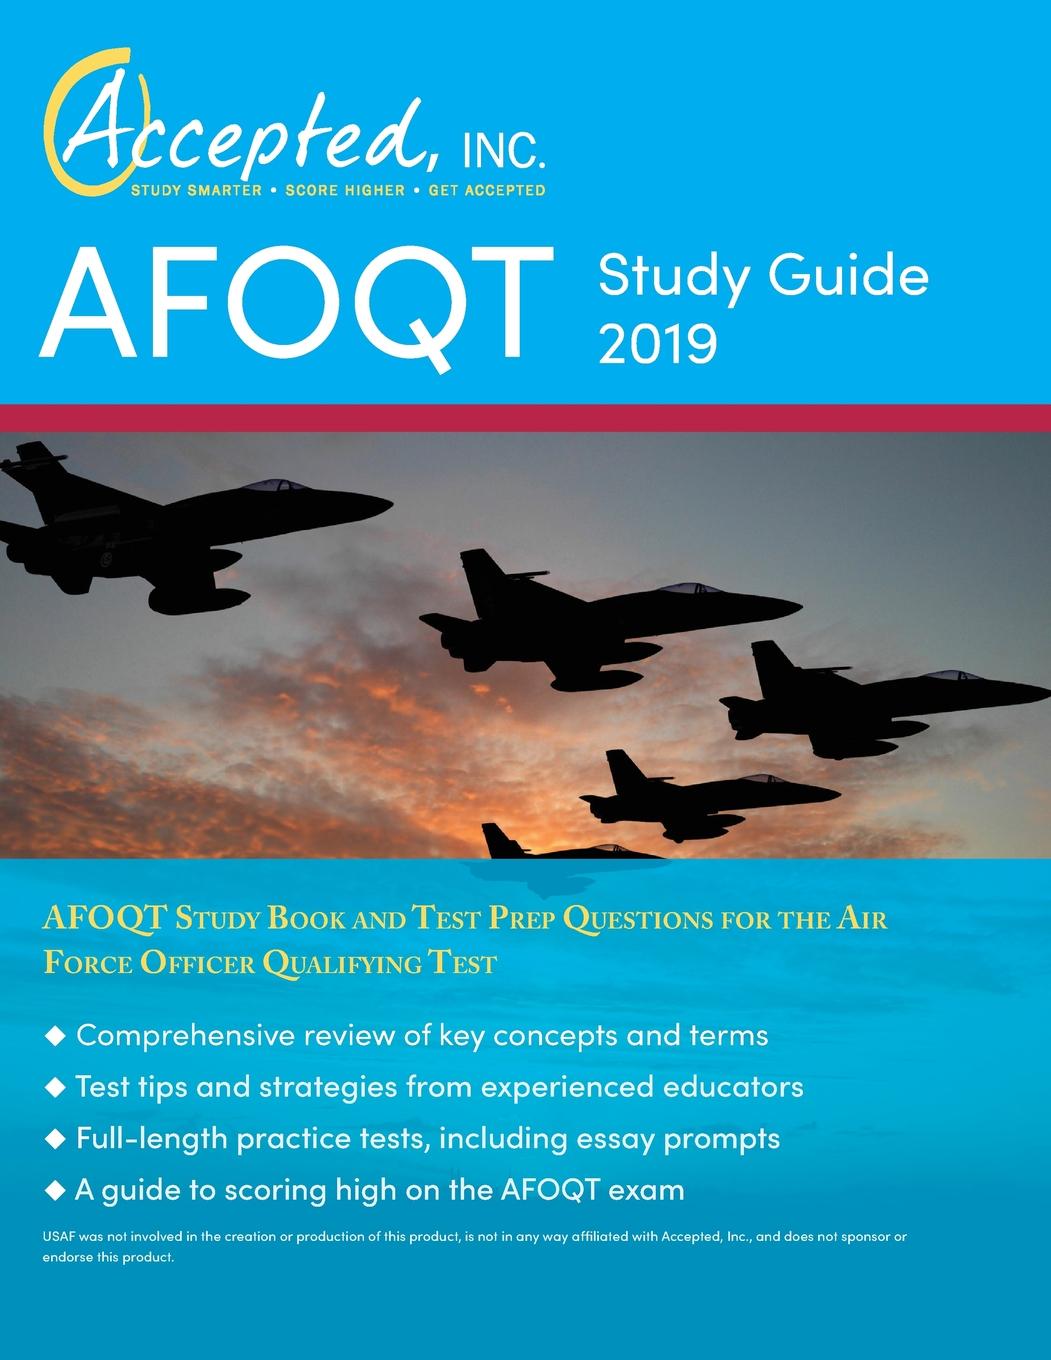 AFOQT Study Guide 2019 AFOQT Study Book And Test Prep Questions For The Air Force Officer